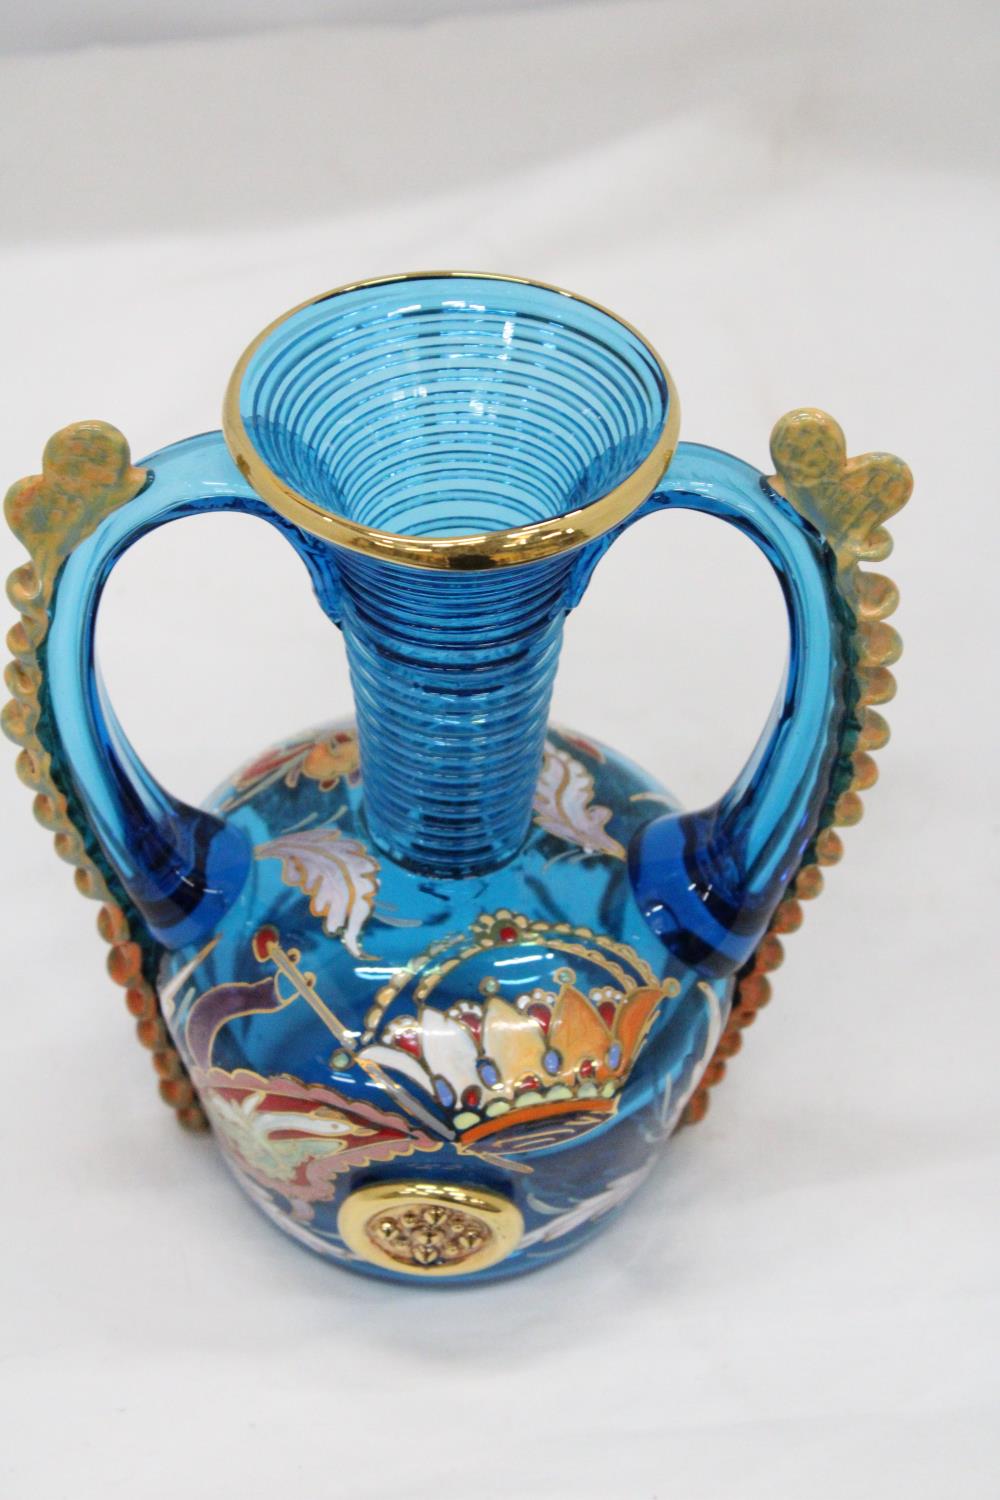 A 1960'S/70'S, LARGE ROYO GLASS VASE WITH GILDED ENAMEL DECORATION, HEIGHT 20CM - Image 6 of 6